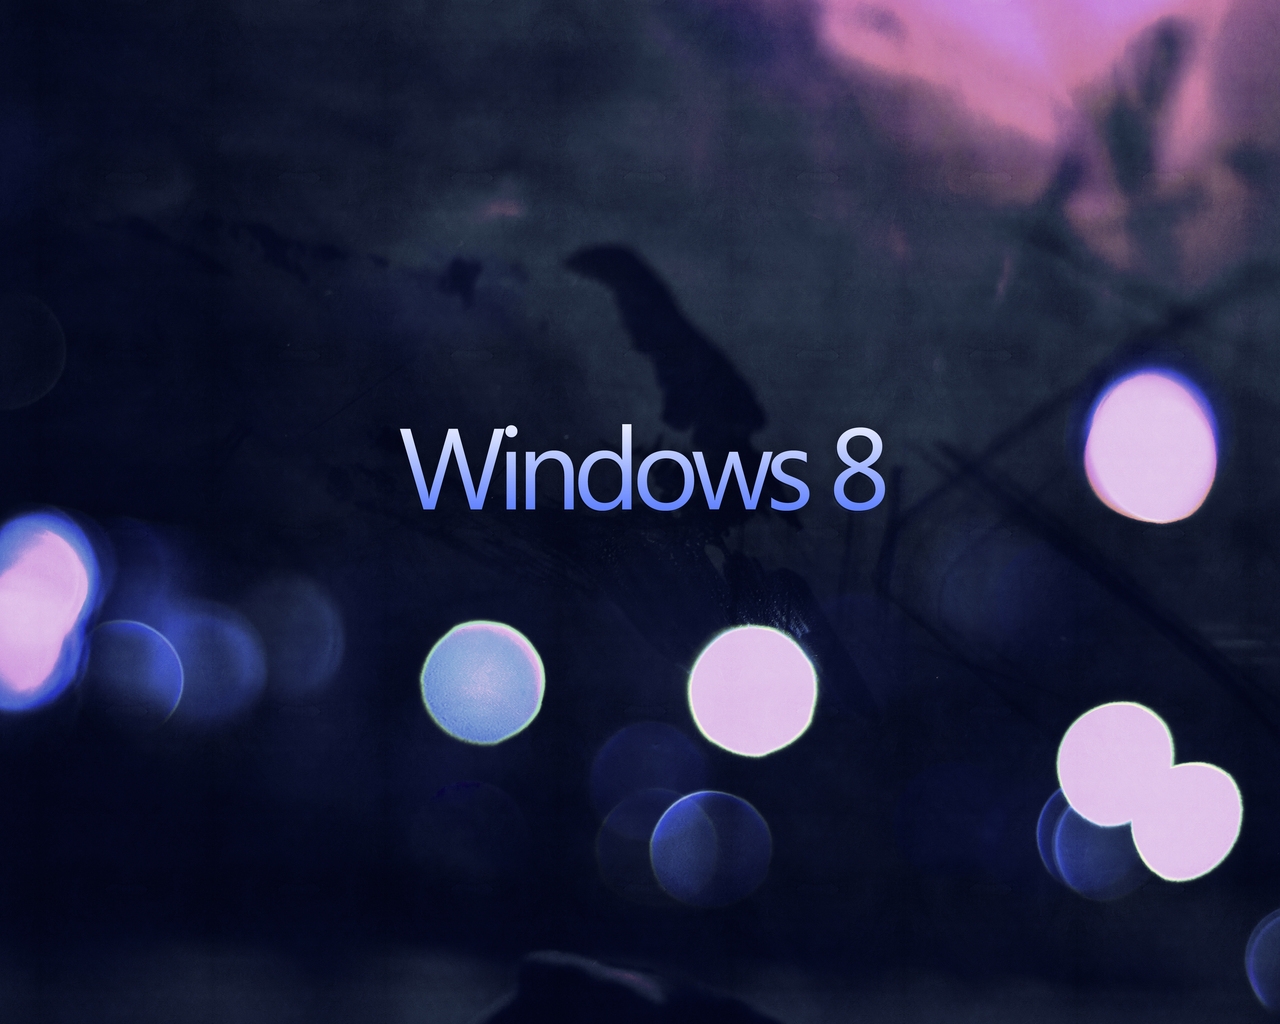 Simple Windows 8 for 1280 x 1024 resolution